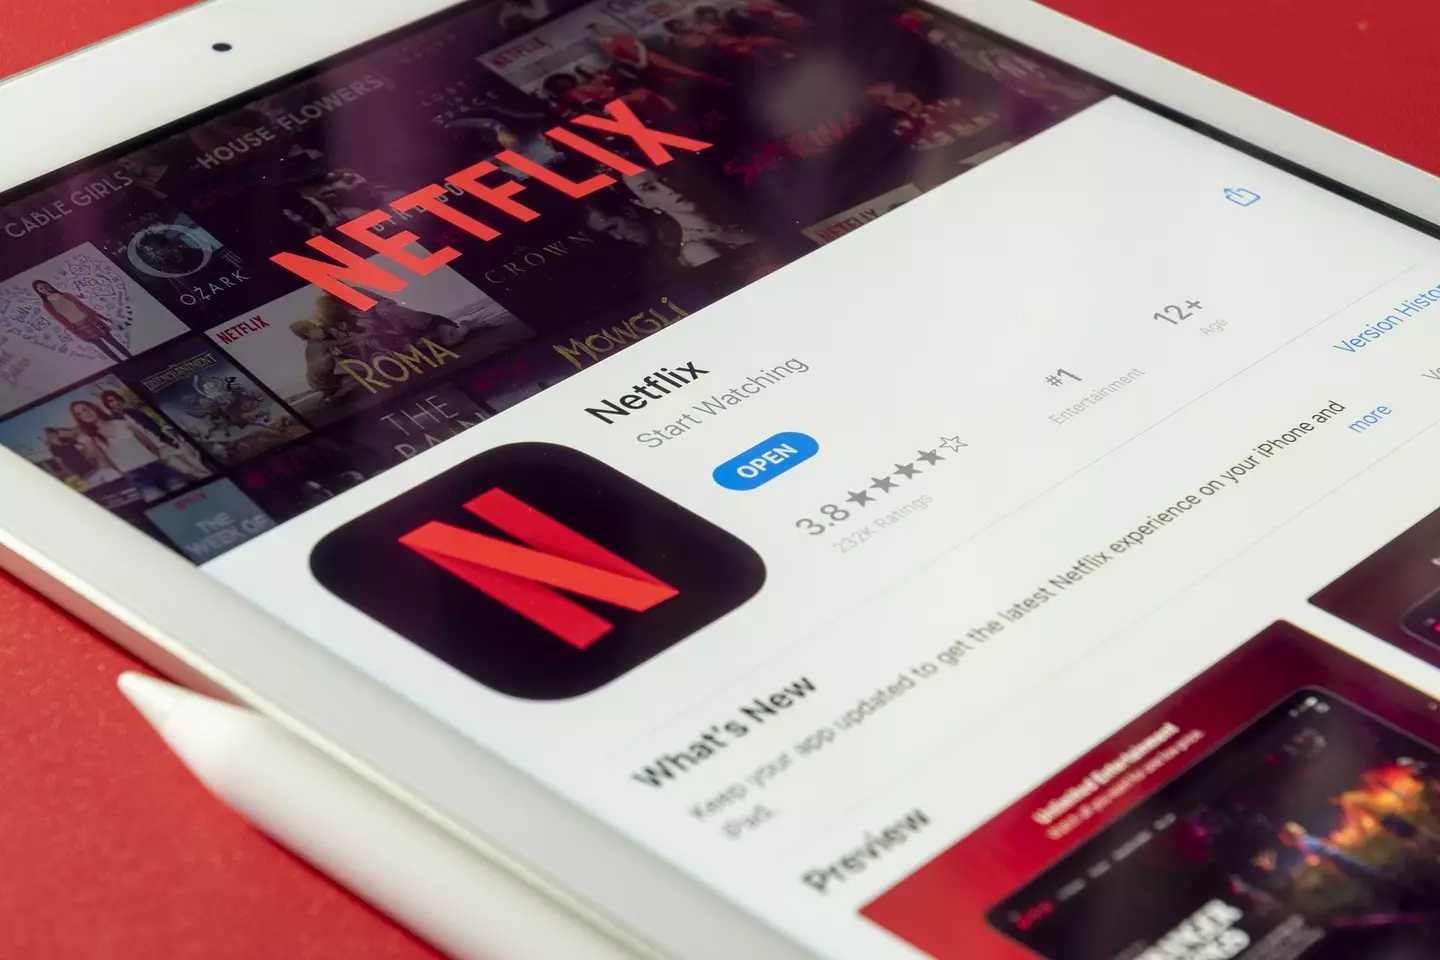 Netflix plans to introduce ads for cheaper subscriptions.